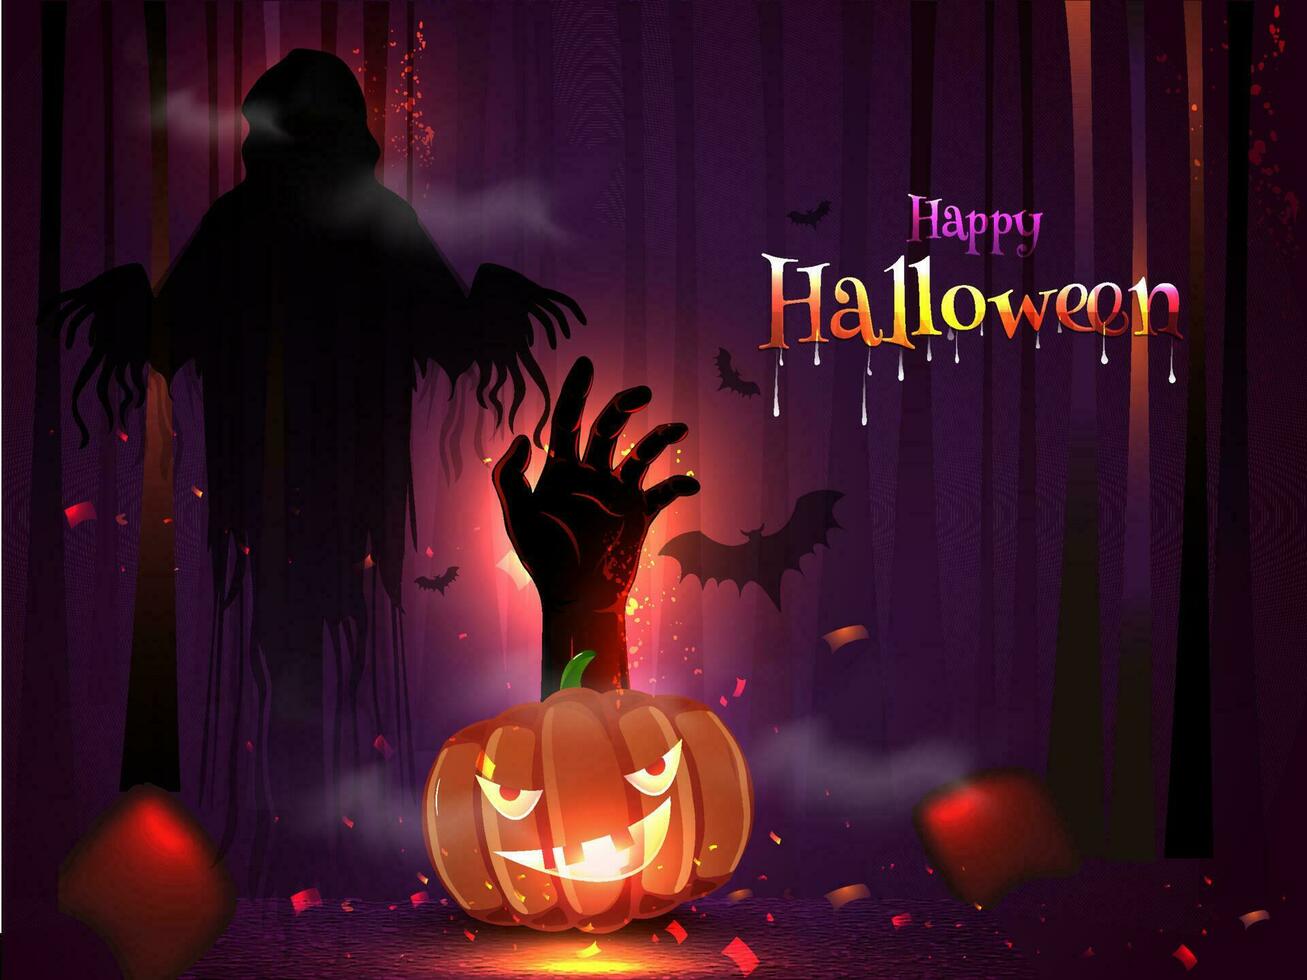 Silhouette of ghost with jack-o-lantern and zombie hand on purple shiny haunted forest background for Happy Halloween celebration. vector